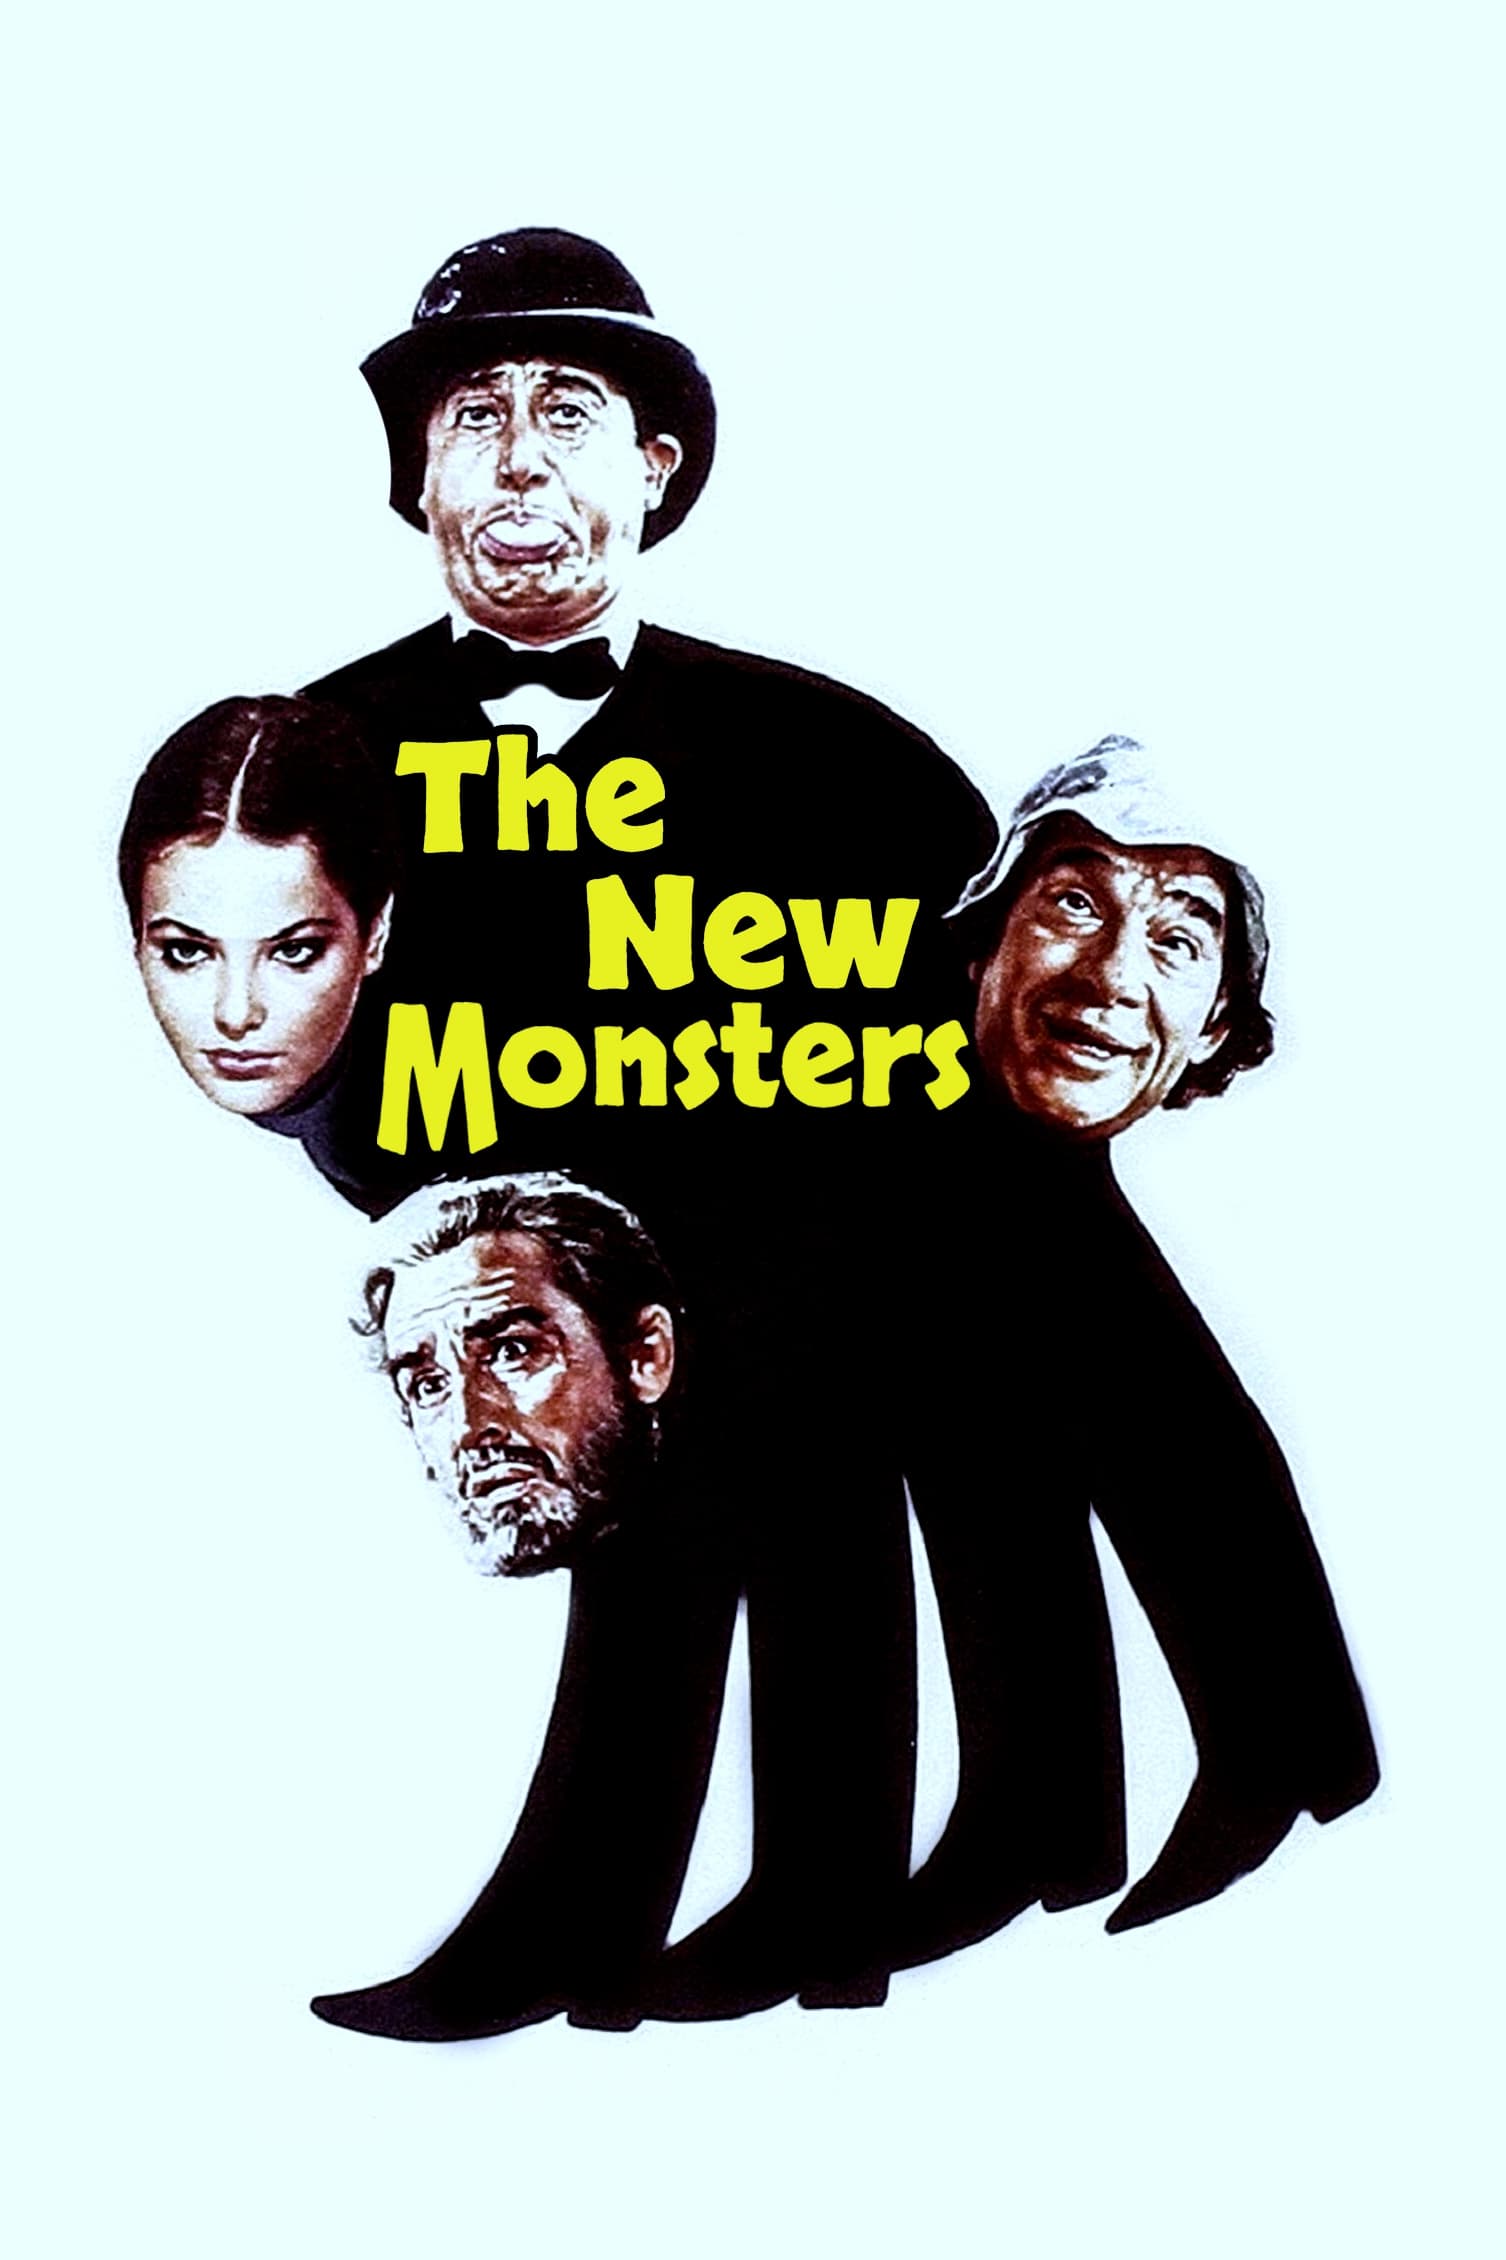 The New Monsters (1977)